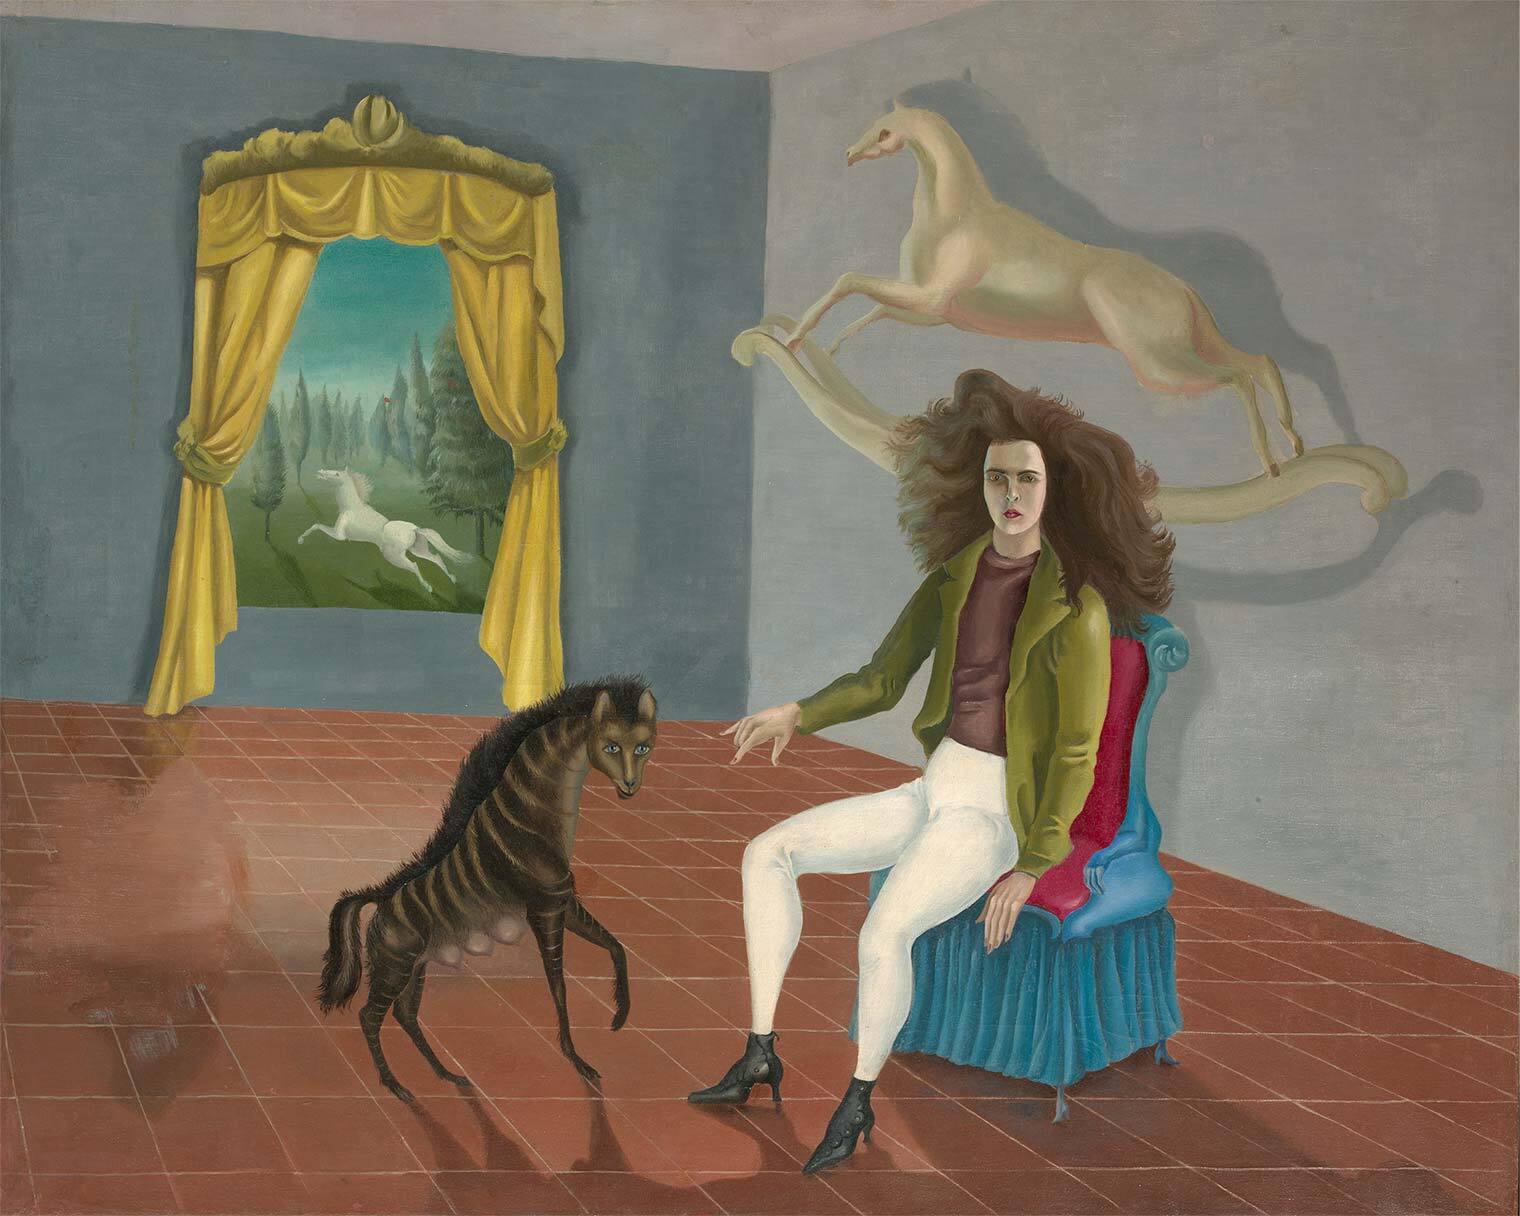 A portrait of the artist sitting in a chair with a hyena at her feet